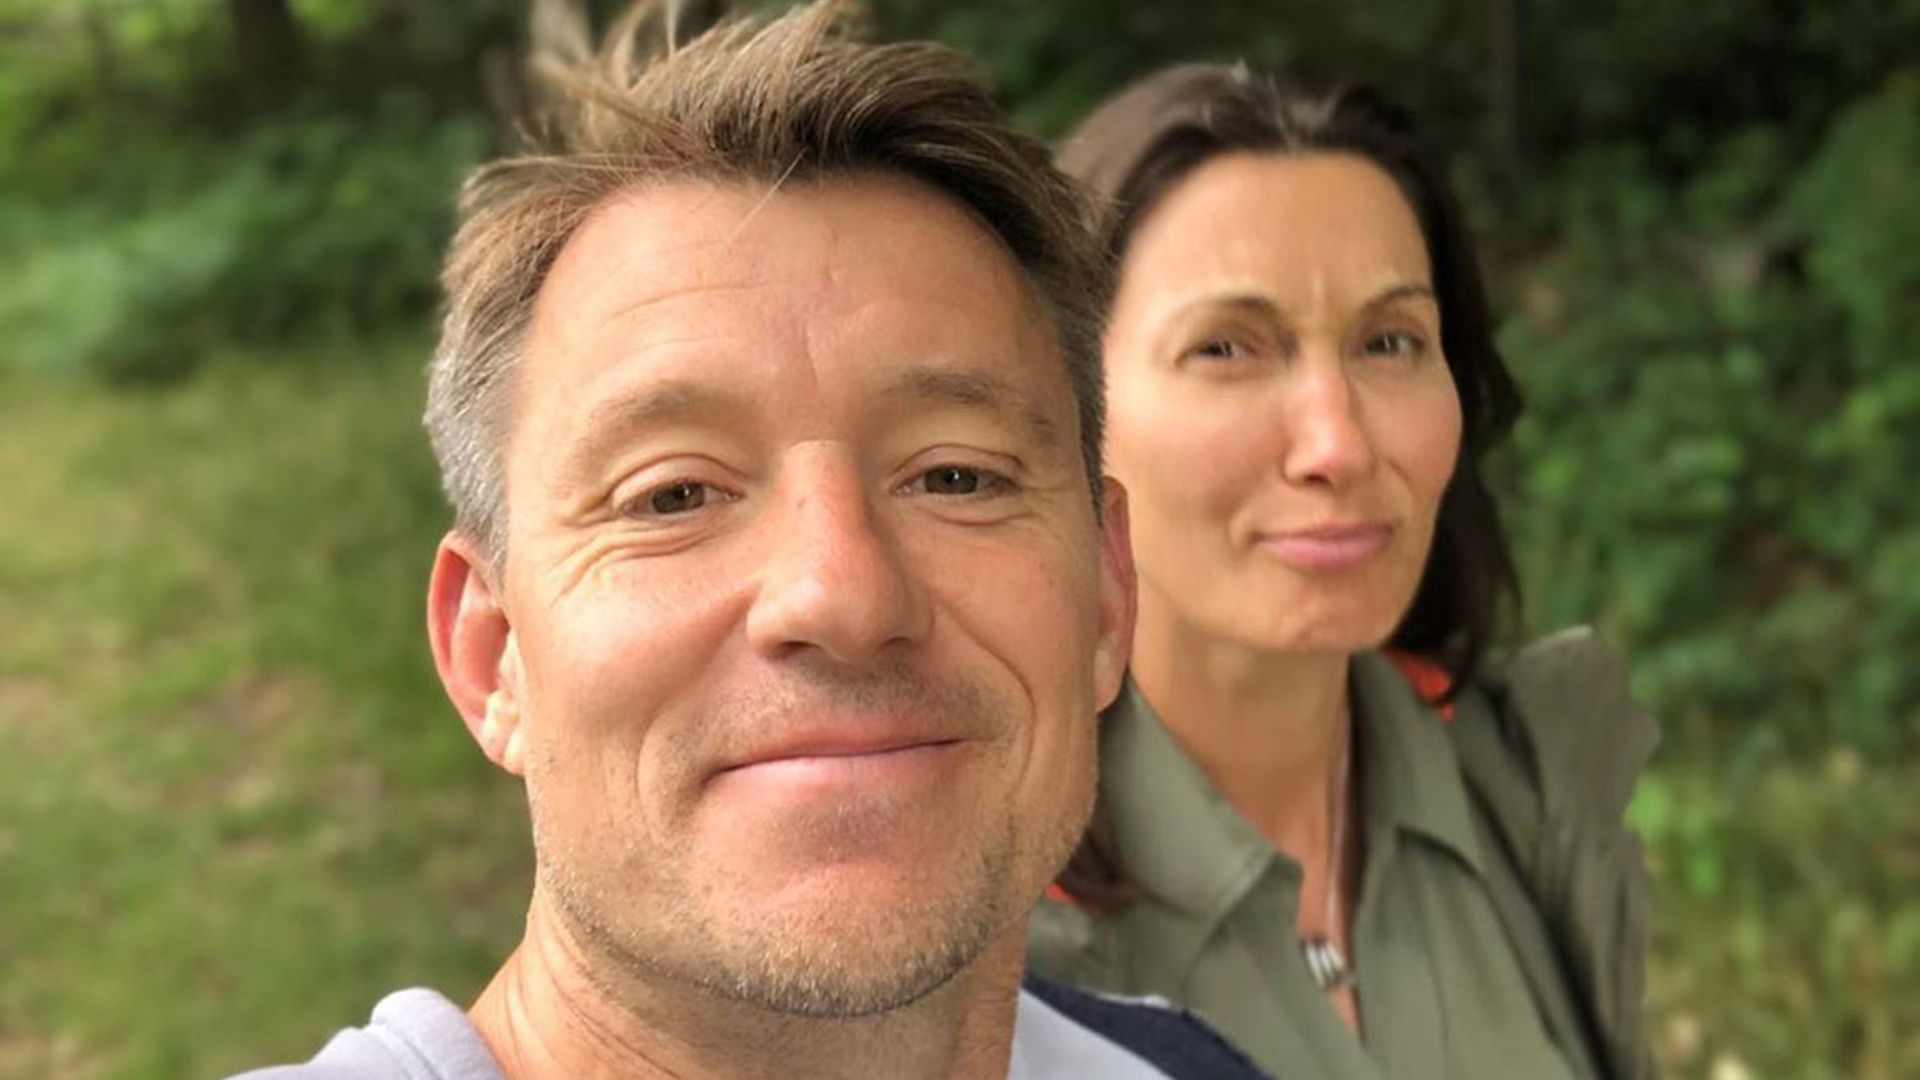 Good Morning Britain's Ben Shephard makes cheeky comment about wife Annie on air - see Susanna Reid's reaction